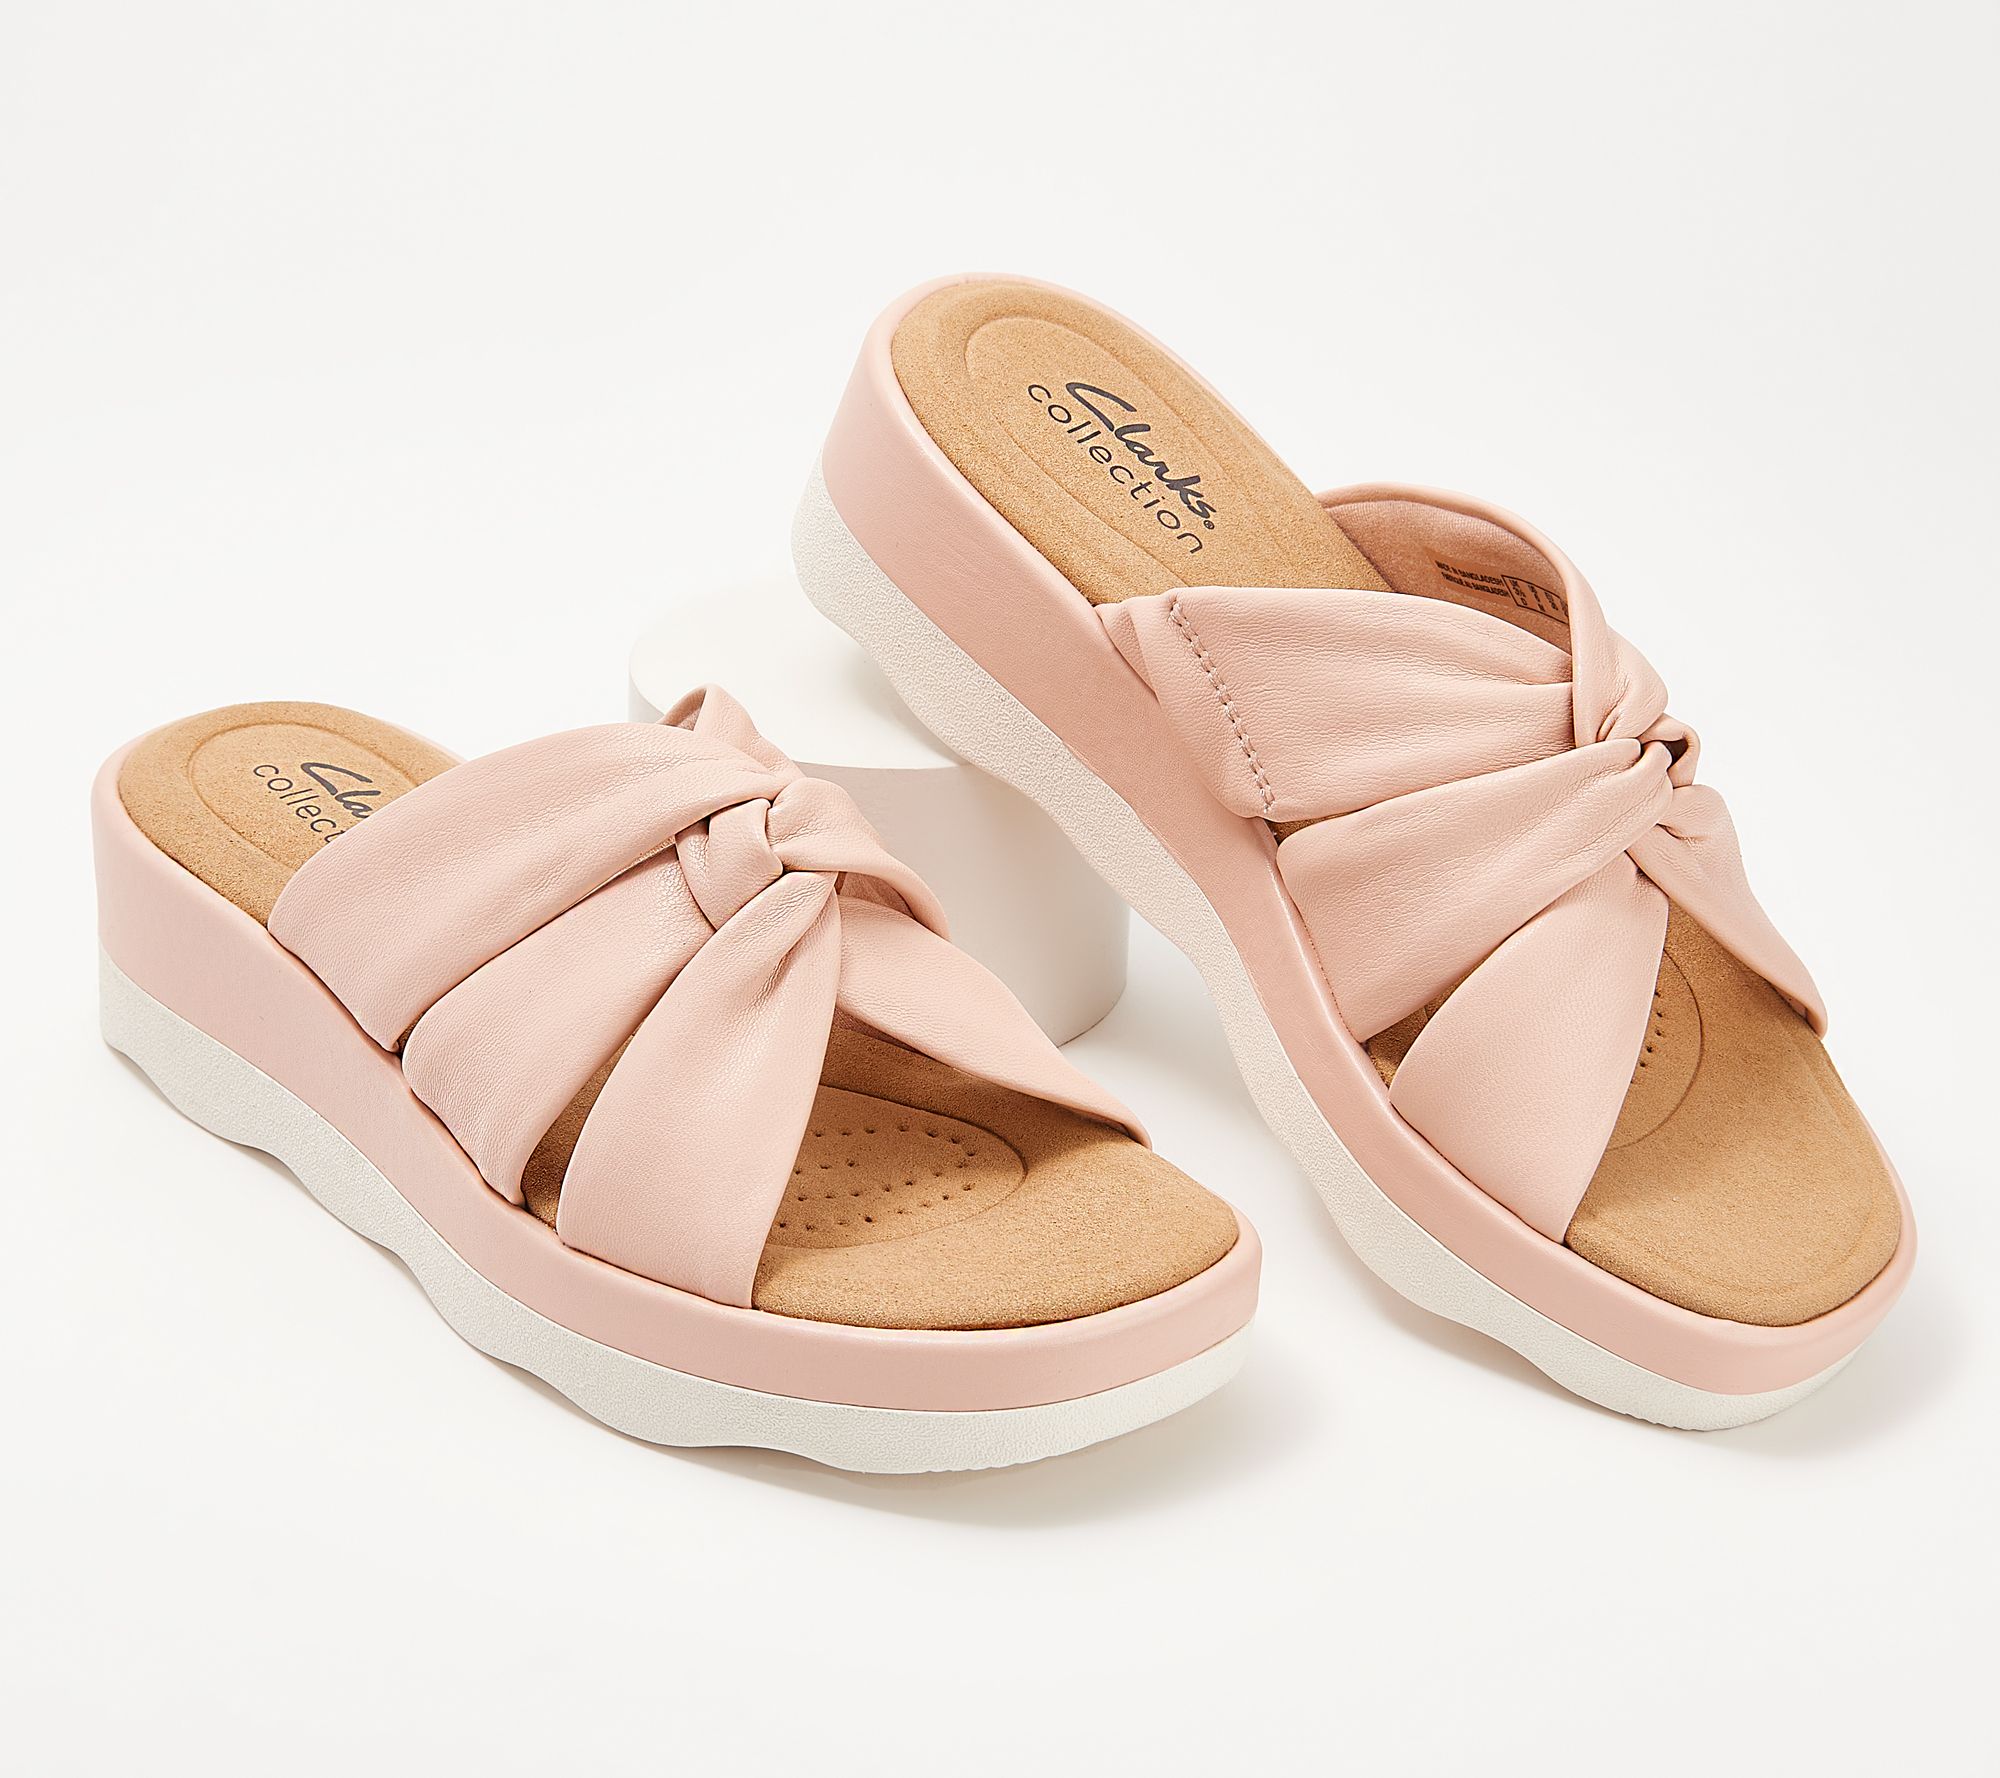 Collection Puffy Knotted Slide Sandals - Clara Charm - QVC.com